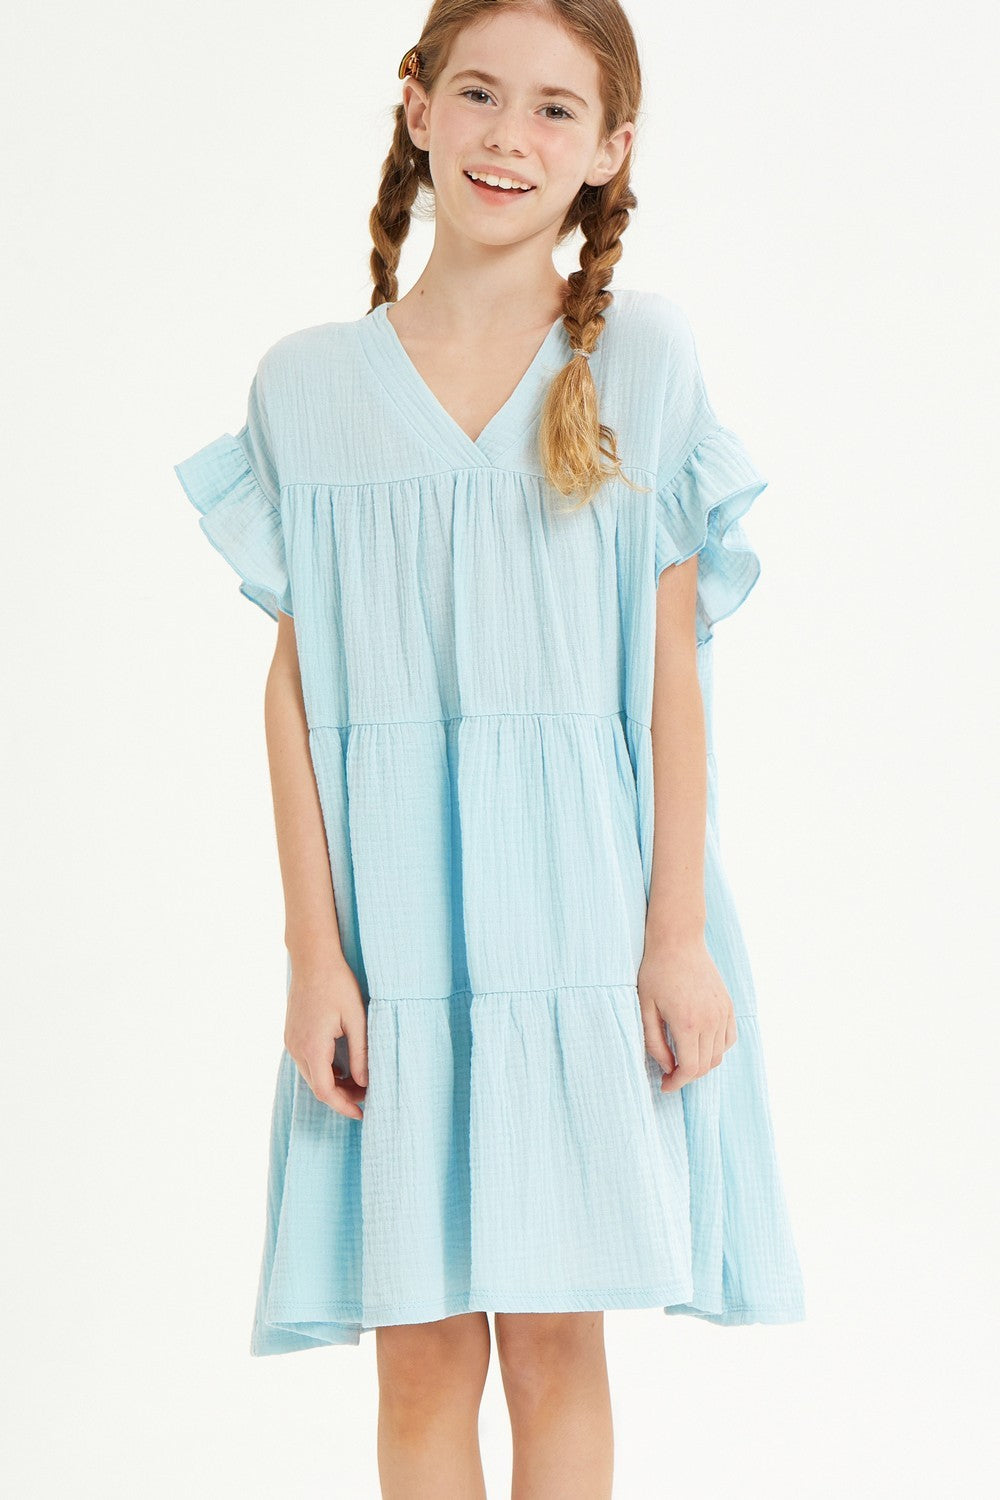 SHELBY TIERED DRESS